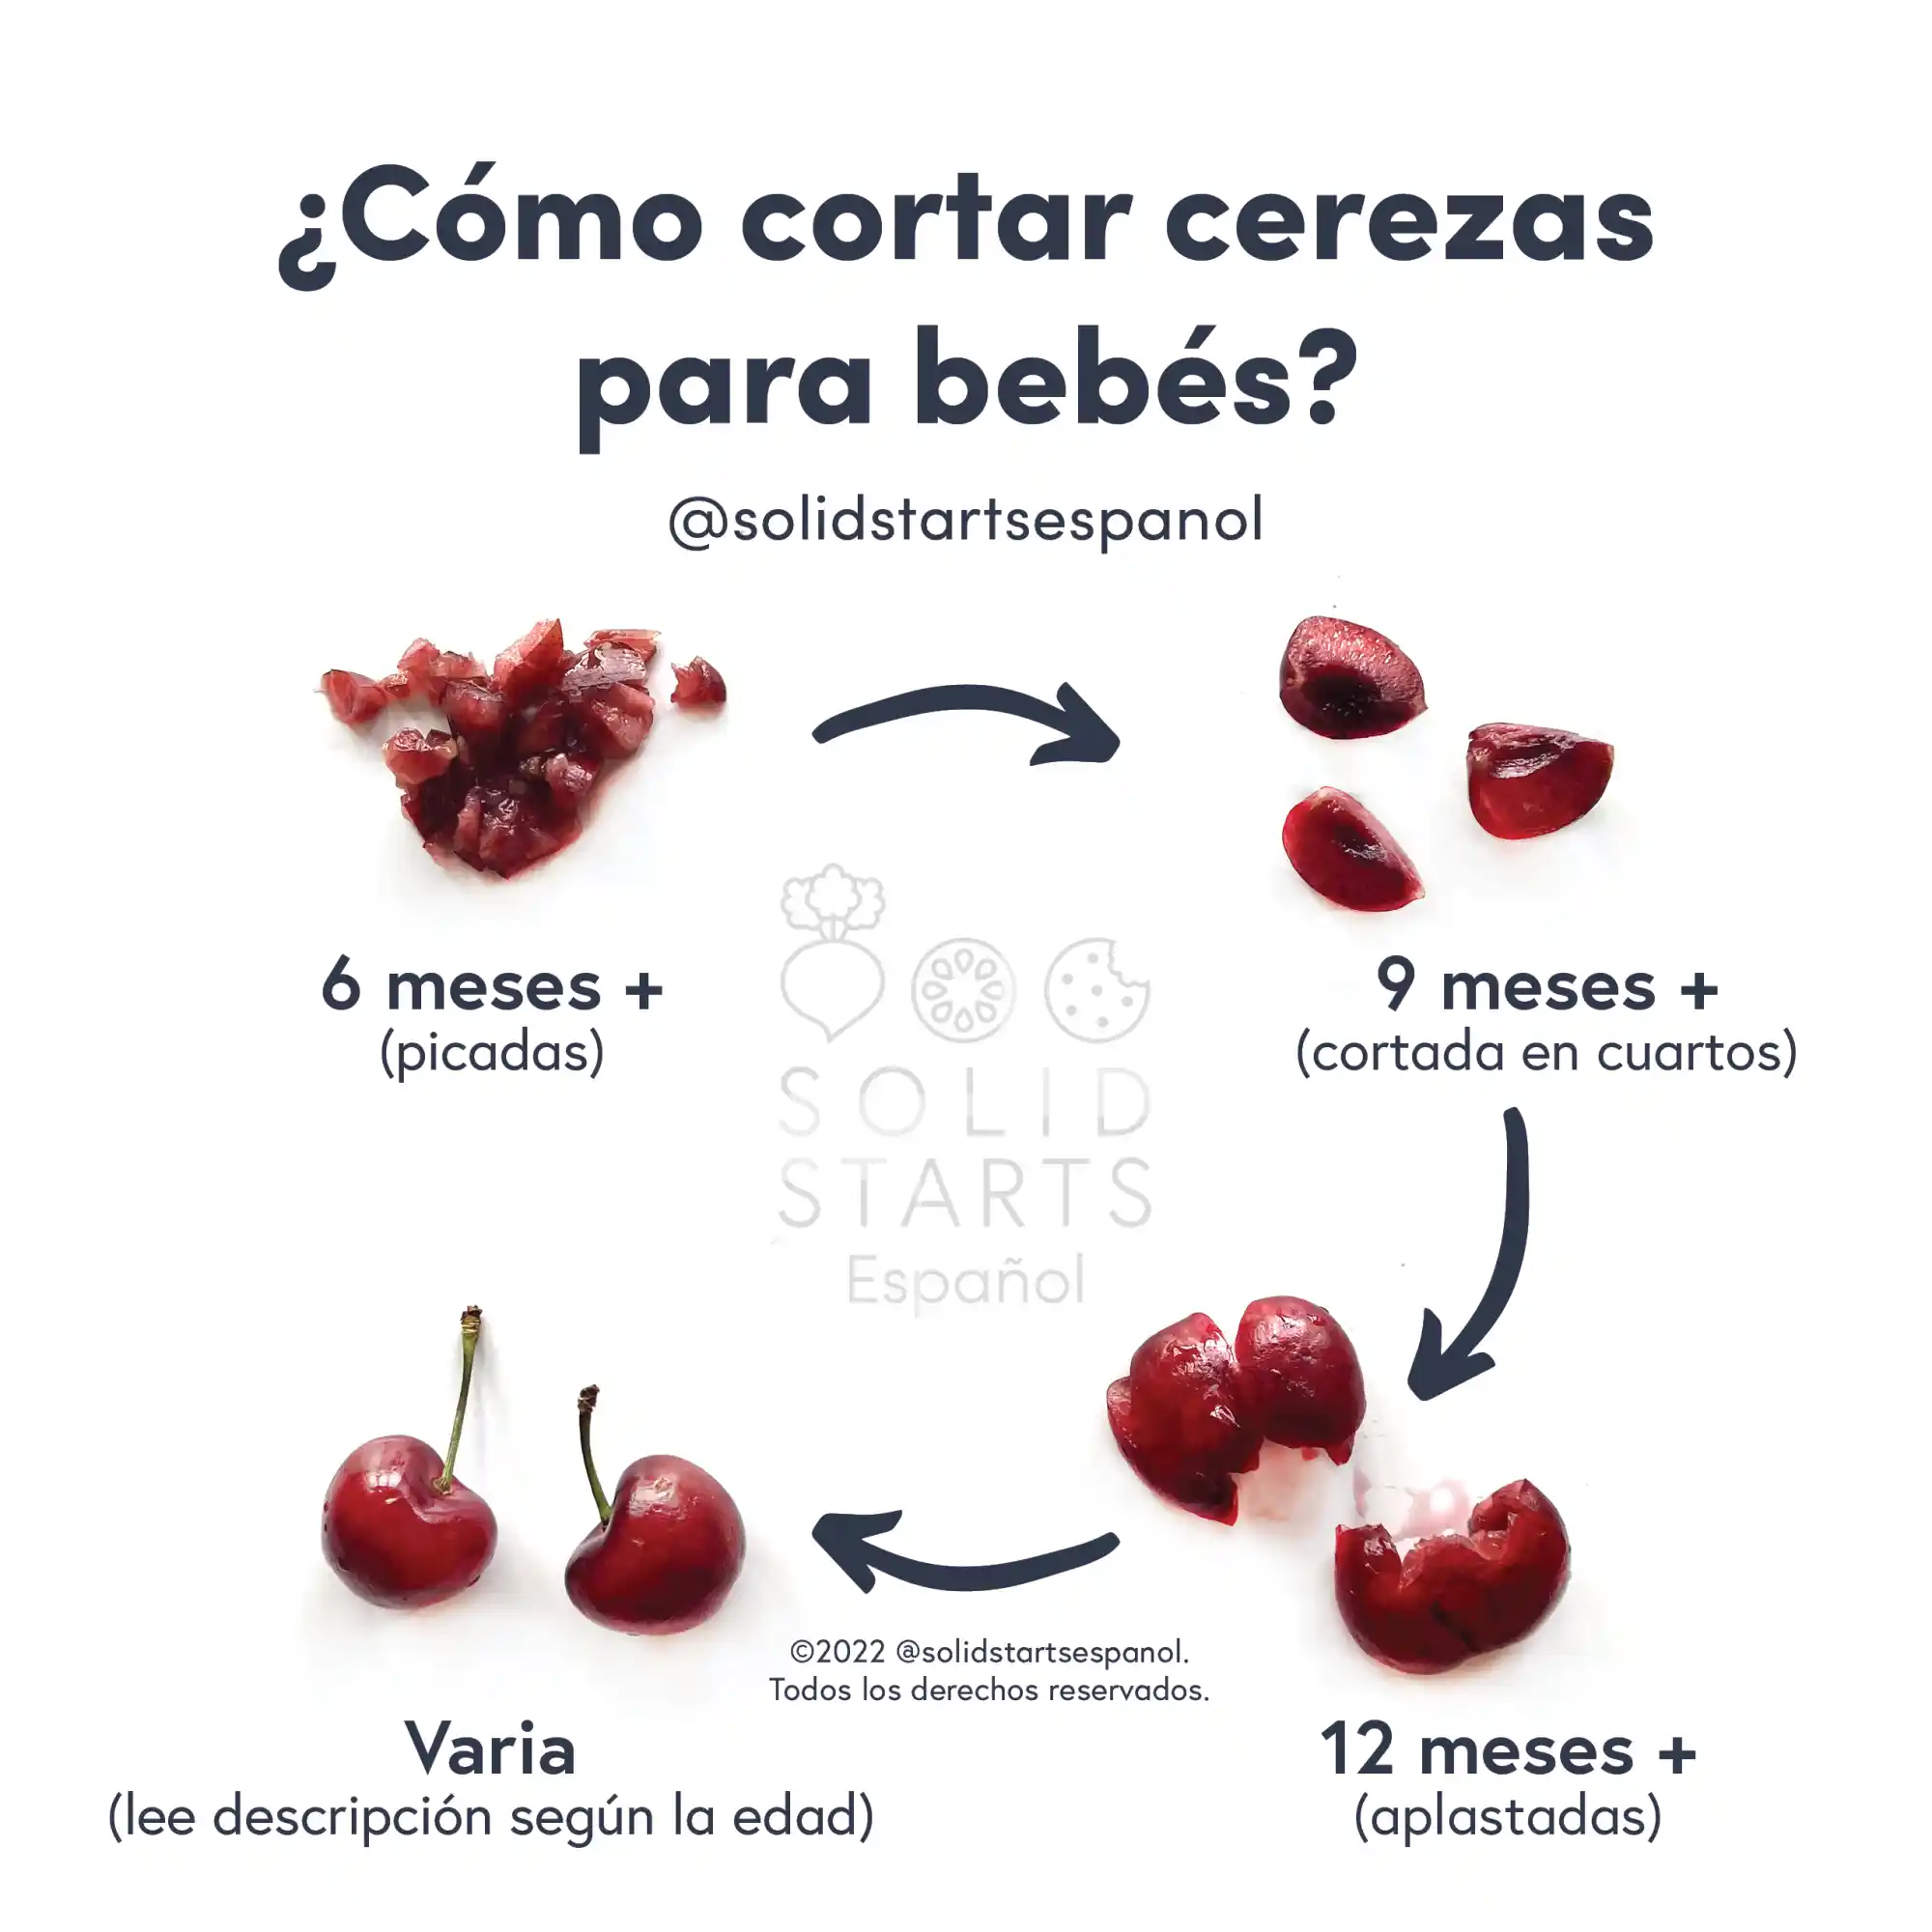 a Solid Starts infographic showing how to cut cherries by age: minced for 6 months+, quartered for 9 months+, flattened, pitted for 12 months+ and varies for whole